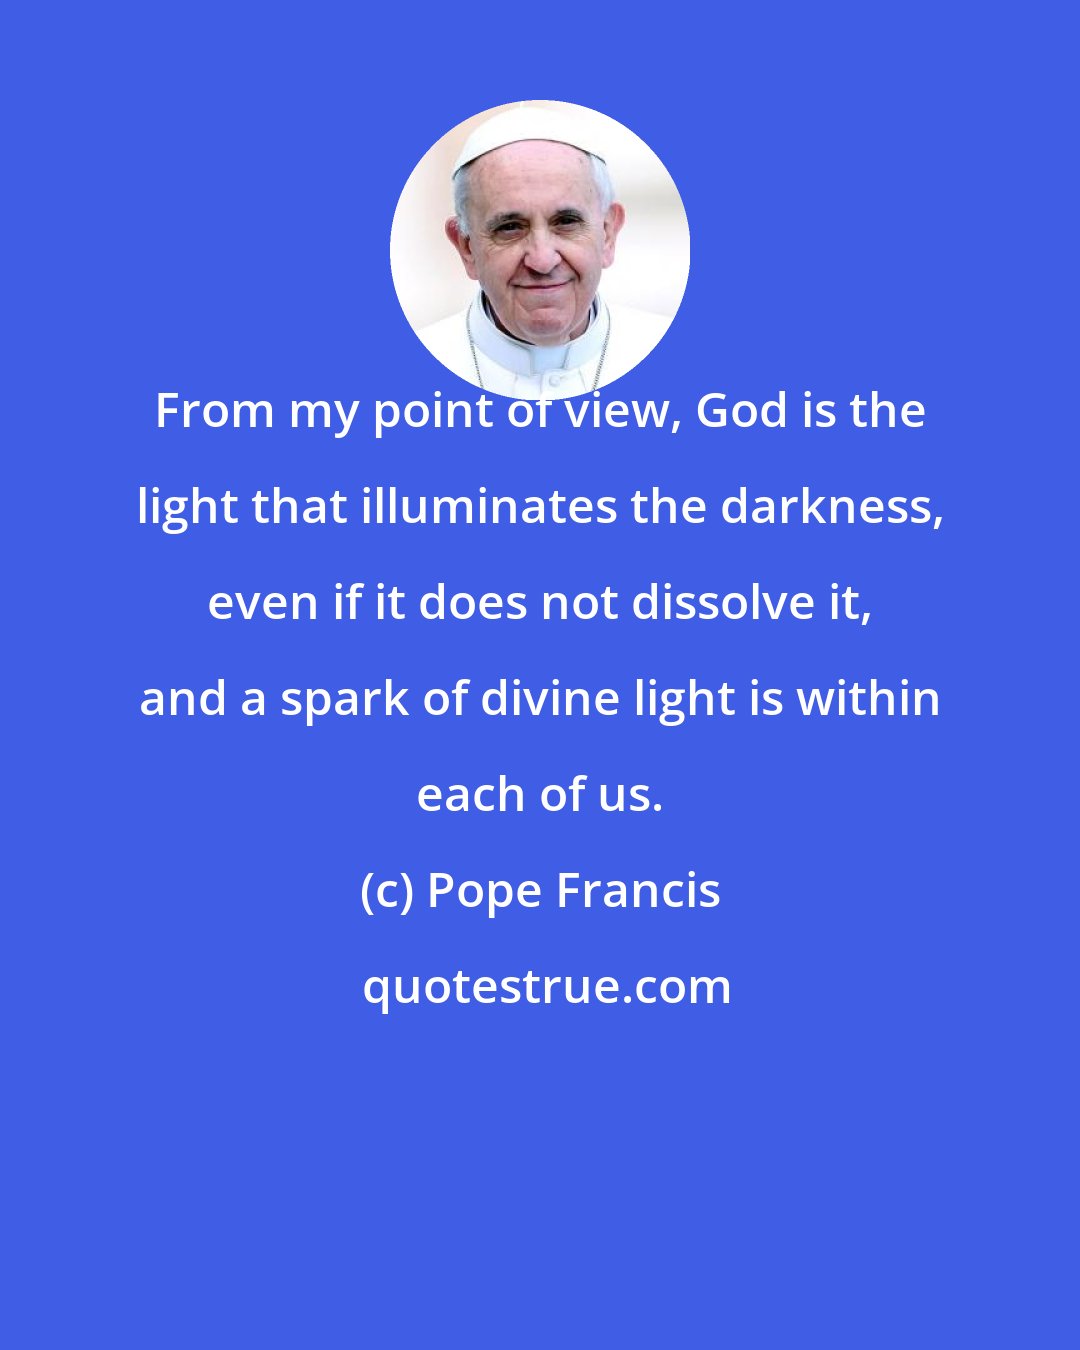 Pope Francis: From my point of view, God is the light that illuminates the darkness, even if it does not dissolve it, and a spark of divine light is within each of us.